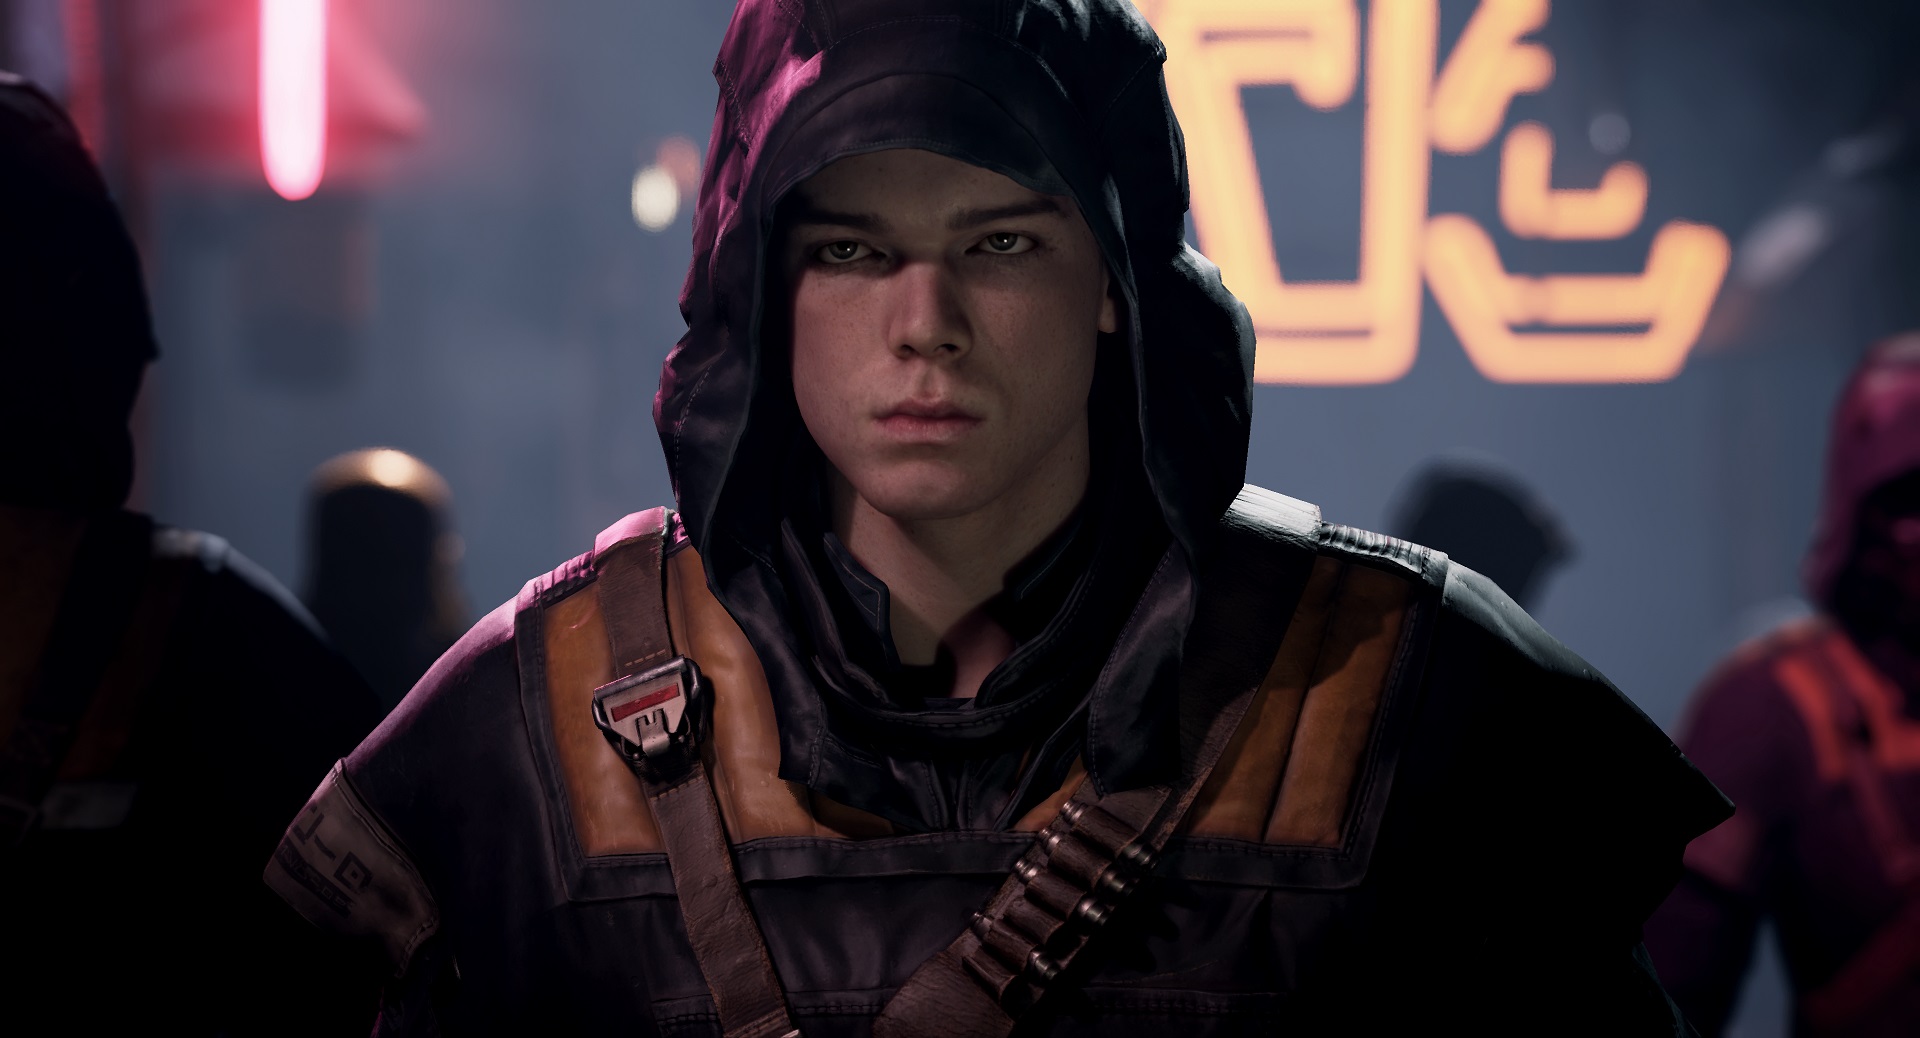 Star Wars Jedi: Fallen Order things we want in a sequel